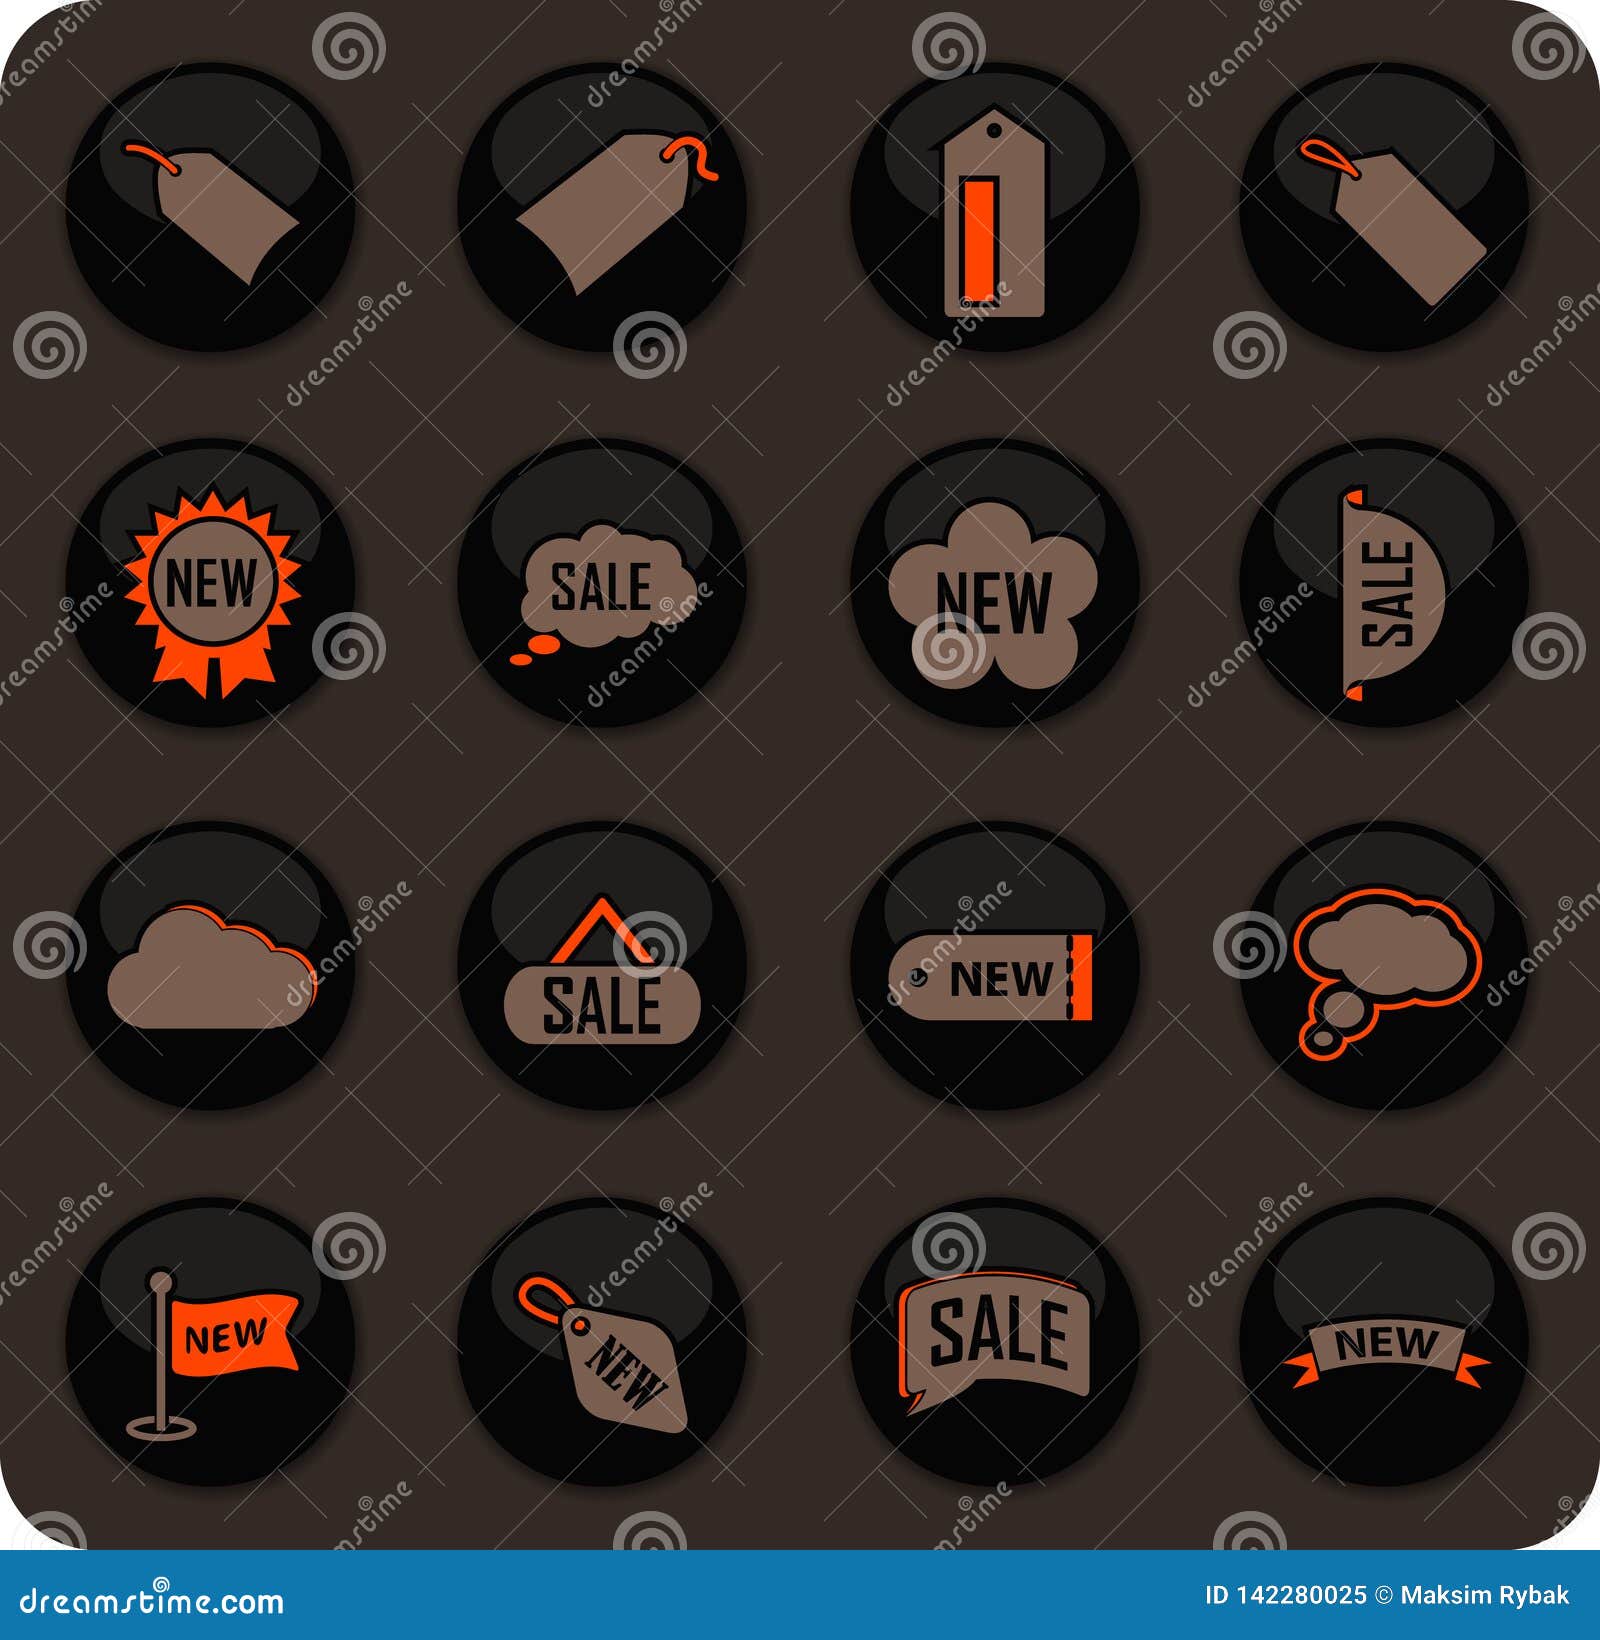 New Stiker  And Label Set Icons Stock Vector  Illustration 